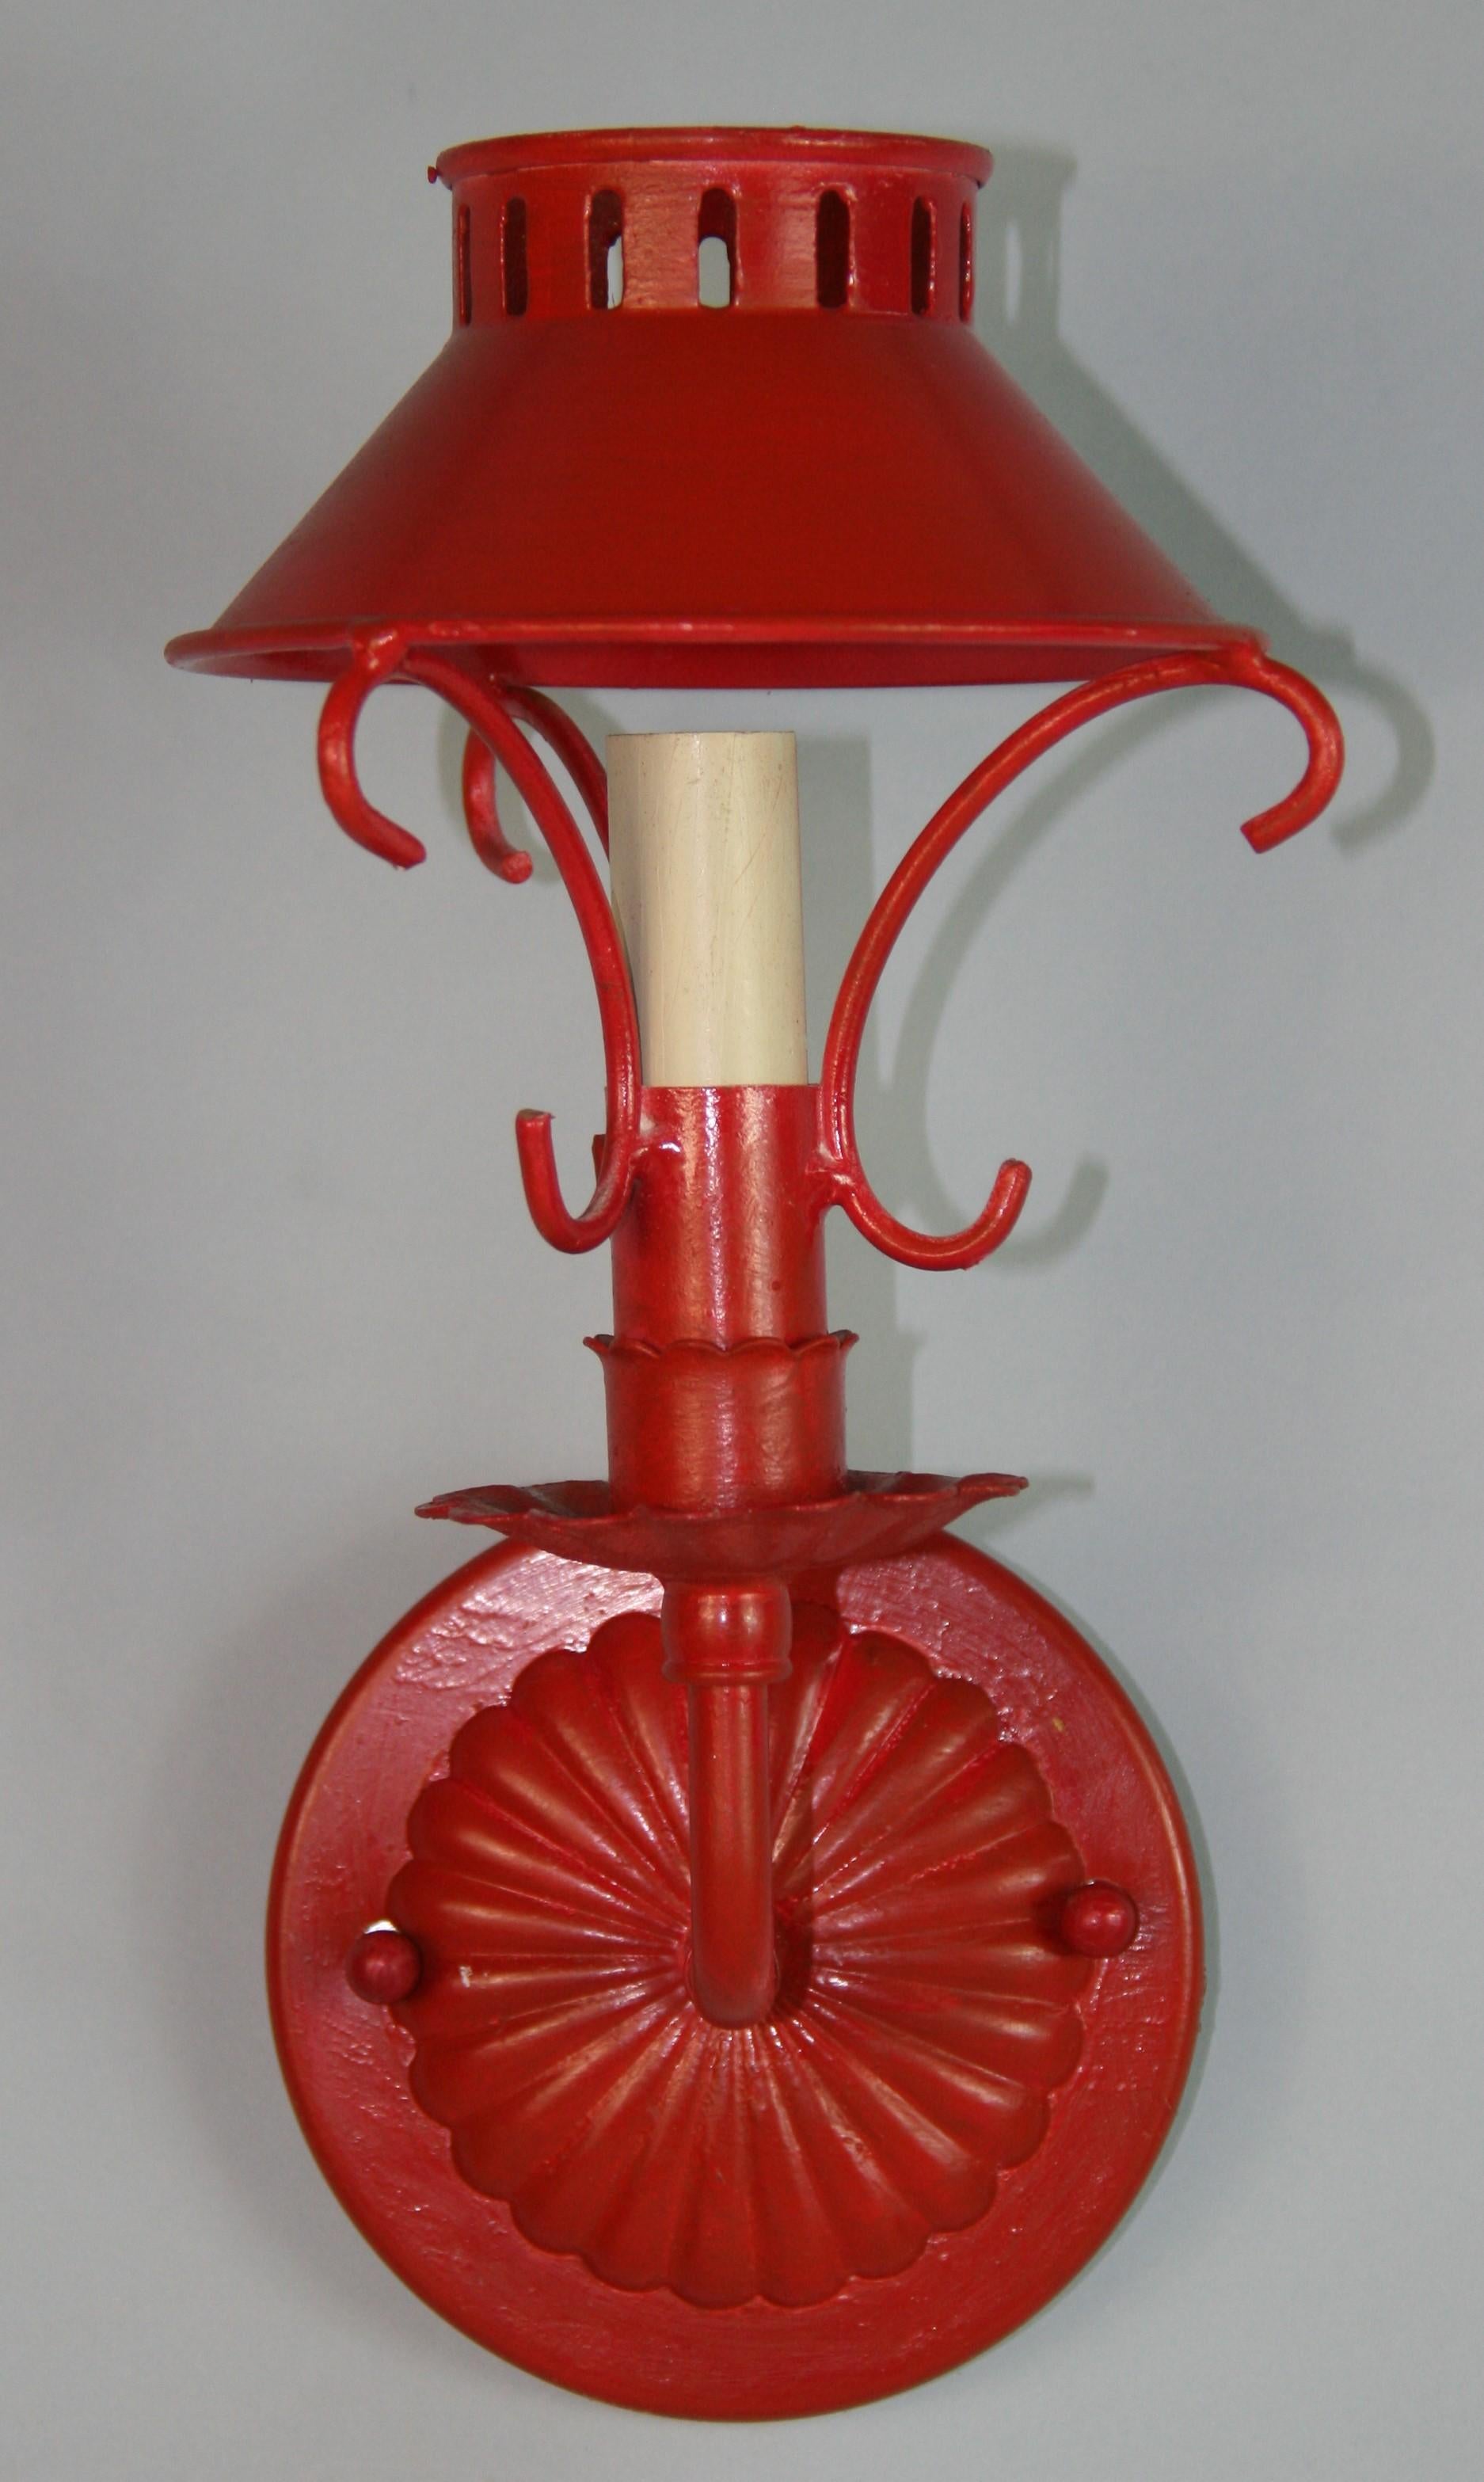 1583 Vintage  Pair French tole sconces with metal shades in a Venetian Red finish
Newly rewired
Takes on 60 watt candelabra based bulb
3 pair available
Priced per pair 